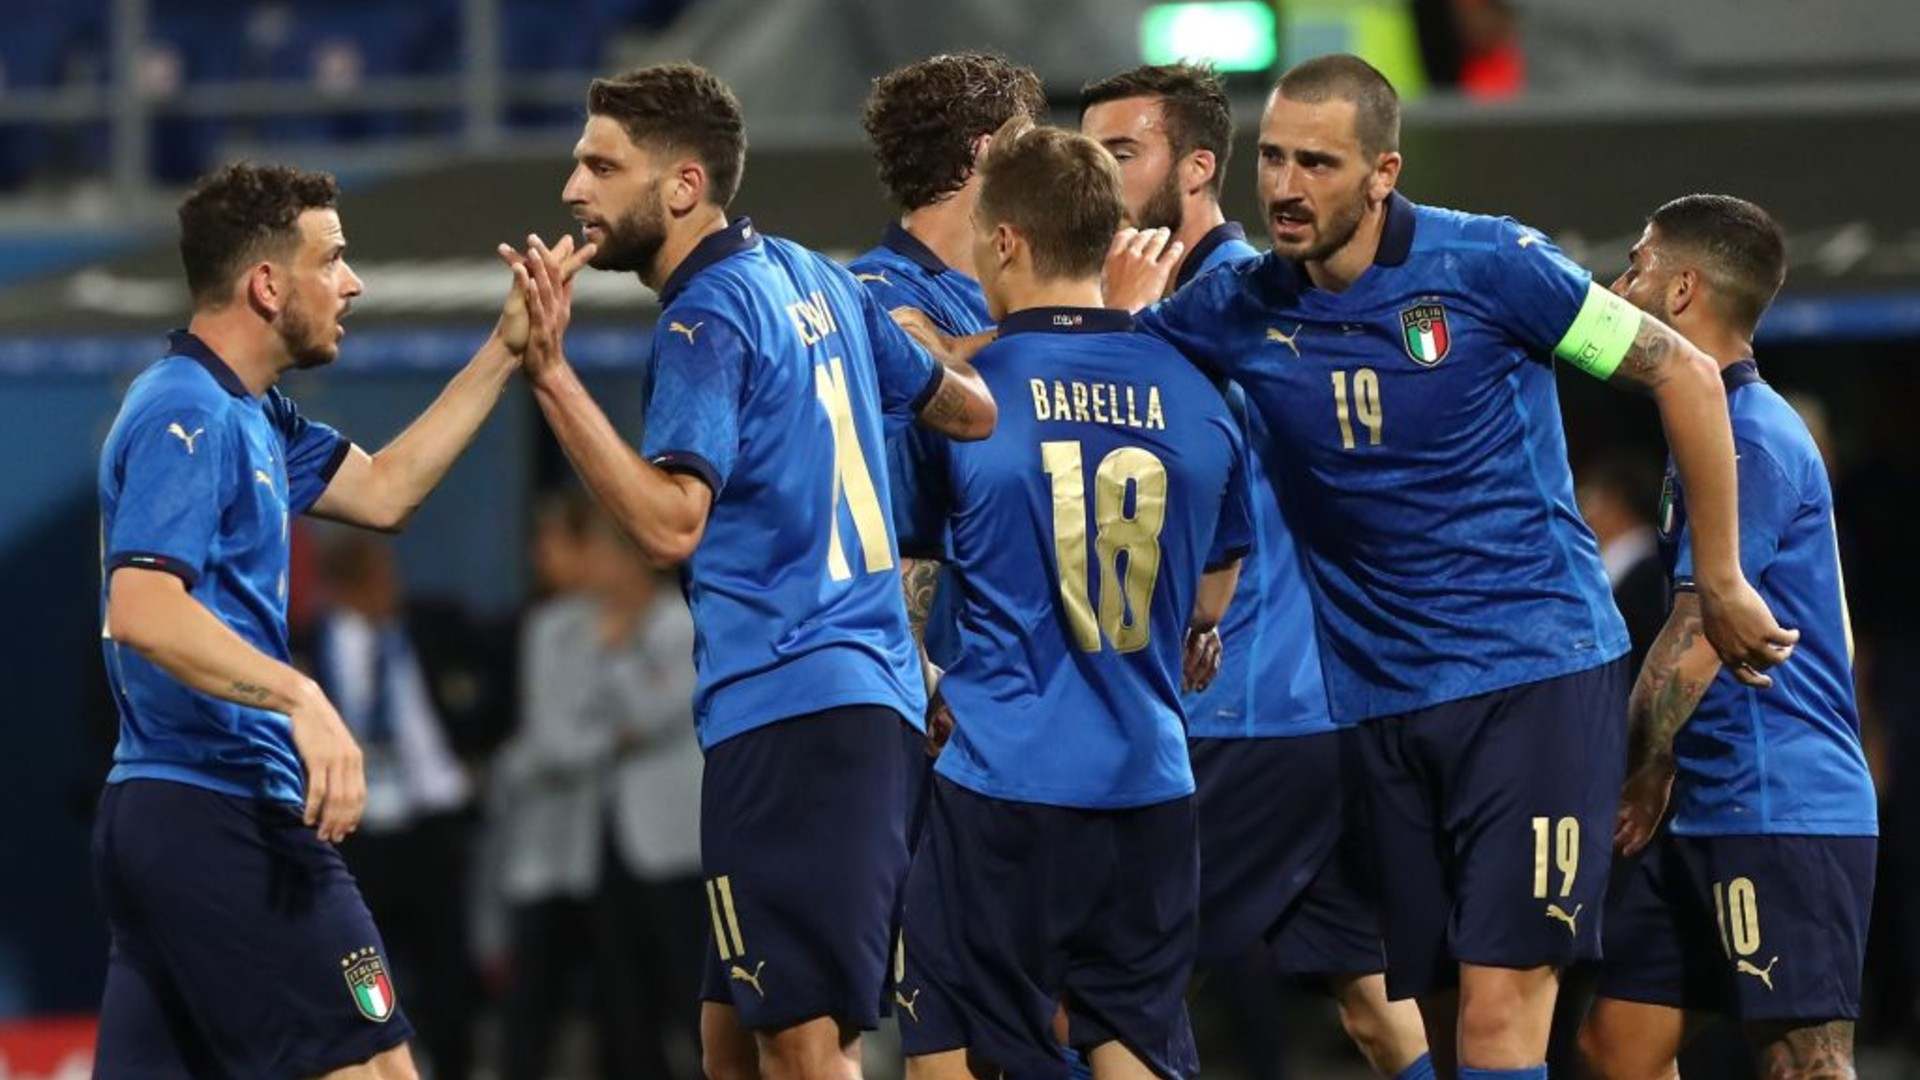 Euro 2020: What to expect from Turkey vs Italy in the opener?